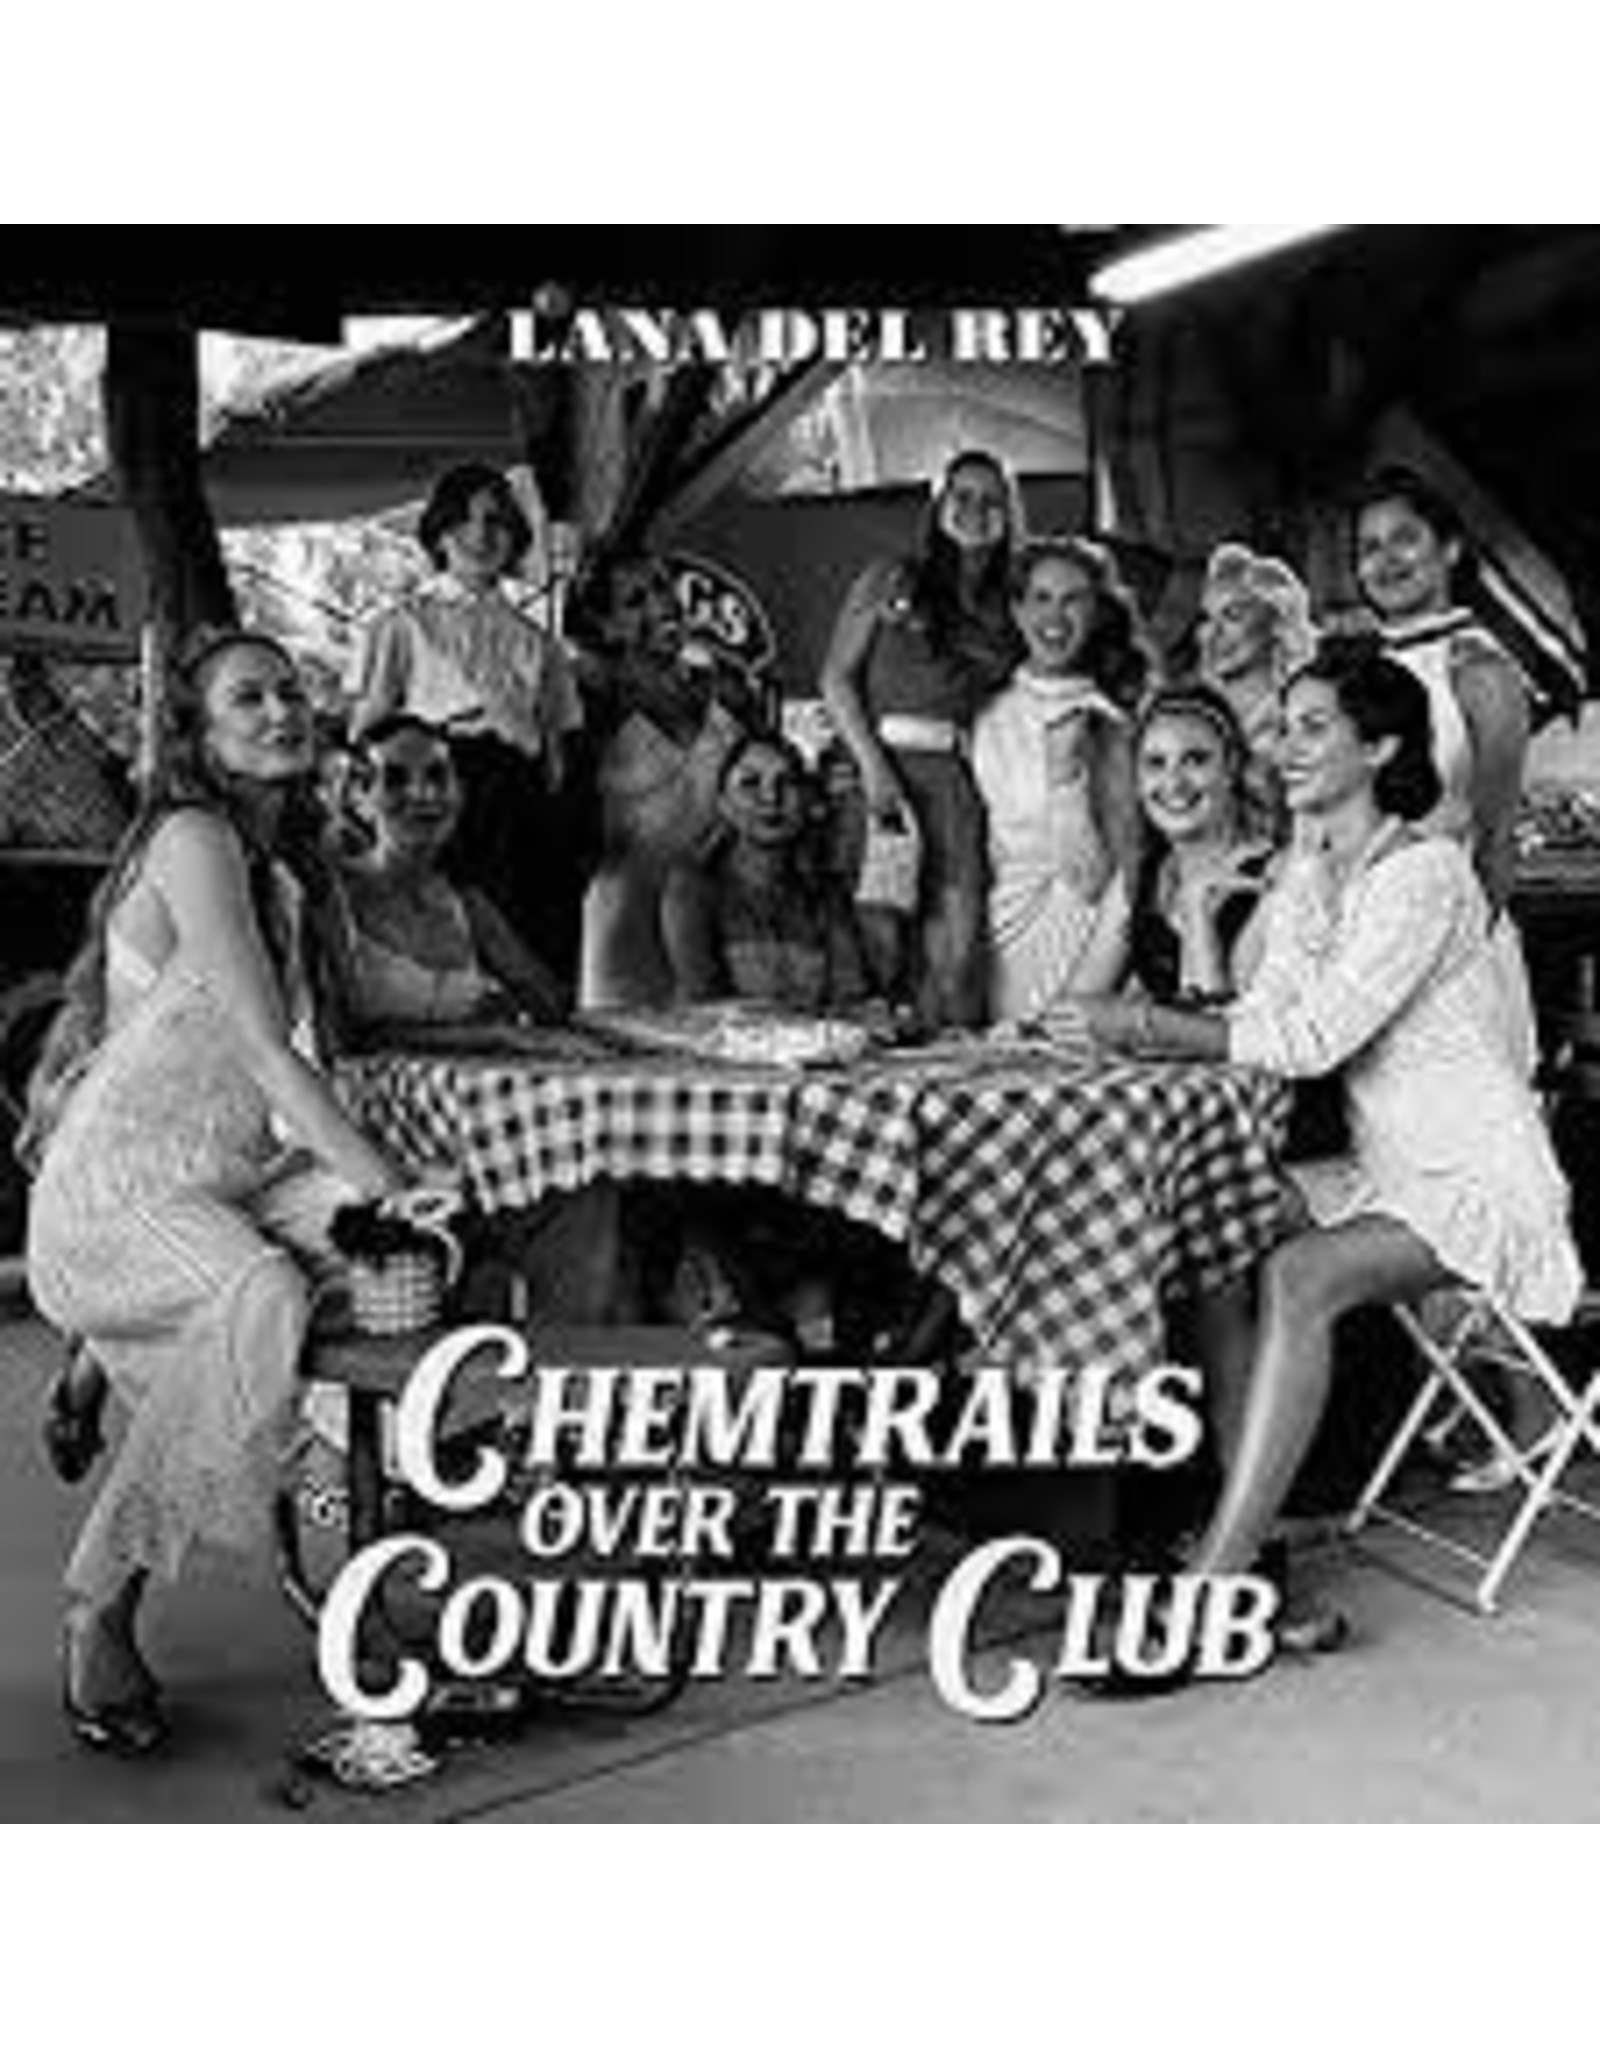 Del Rey, Lana - Chemtrails Over the Country Club LP